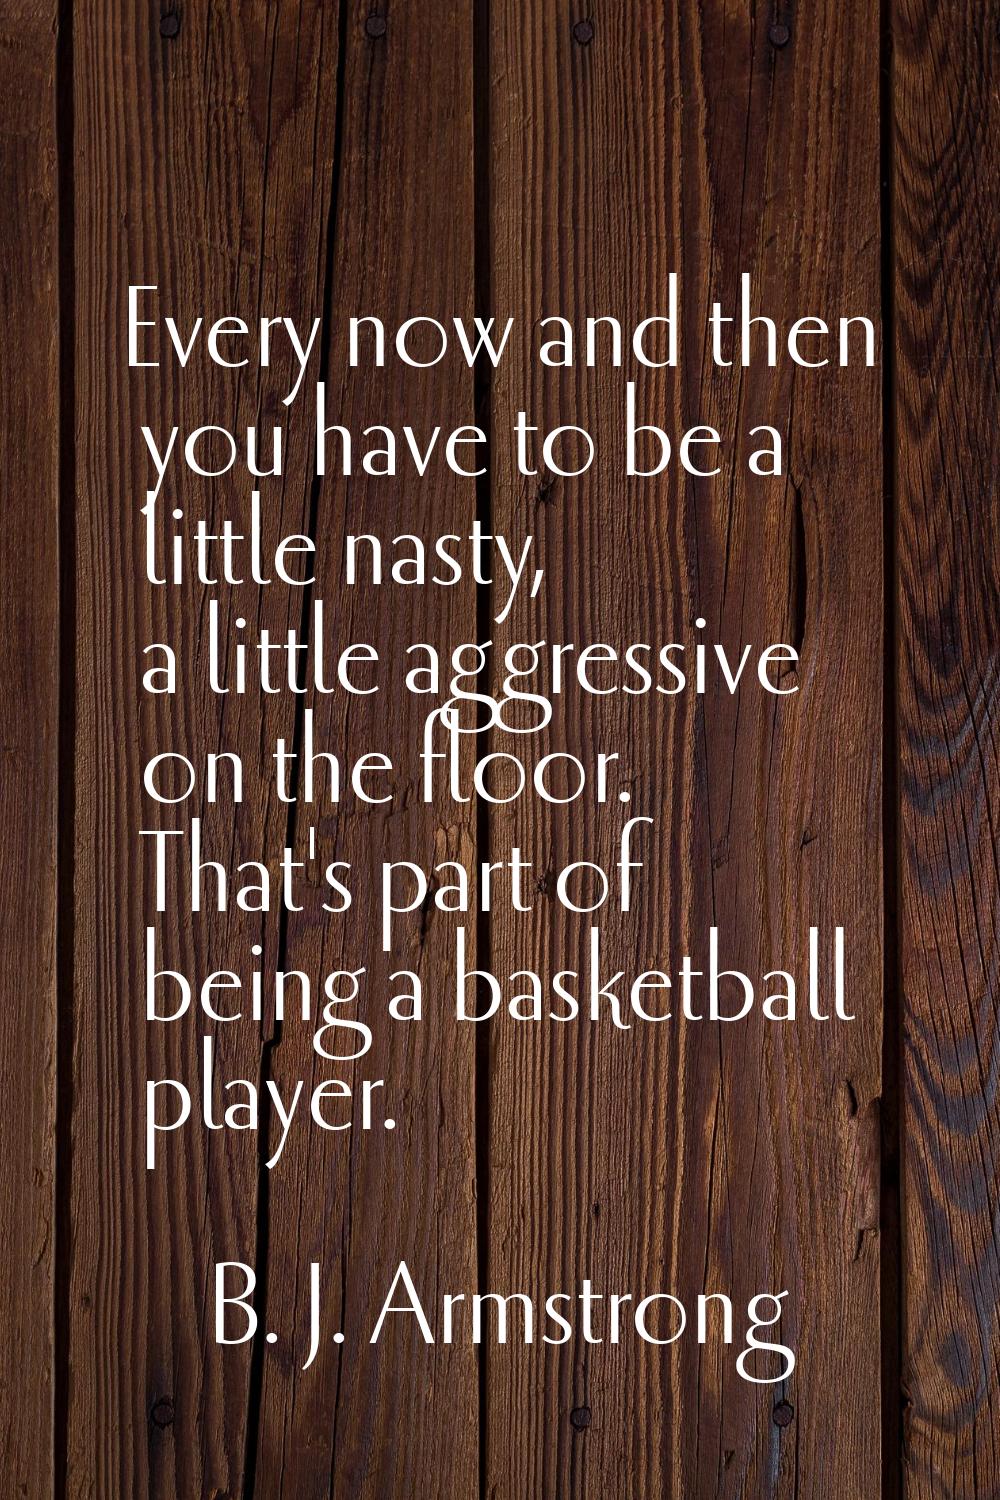 Every now and then you have to be a little nasty, a little aggressive on the floor. That's part of 